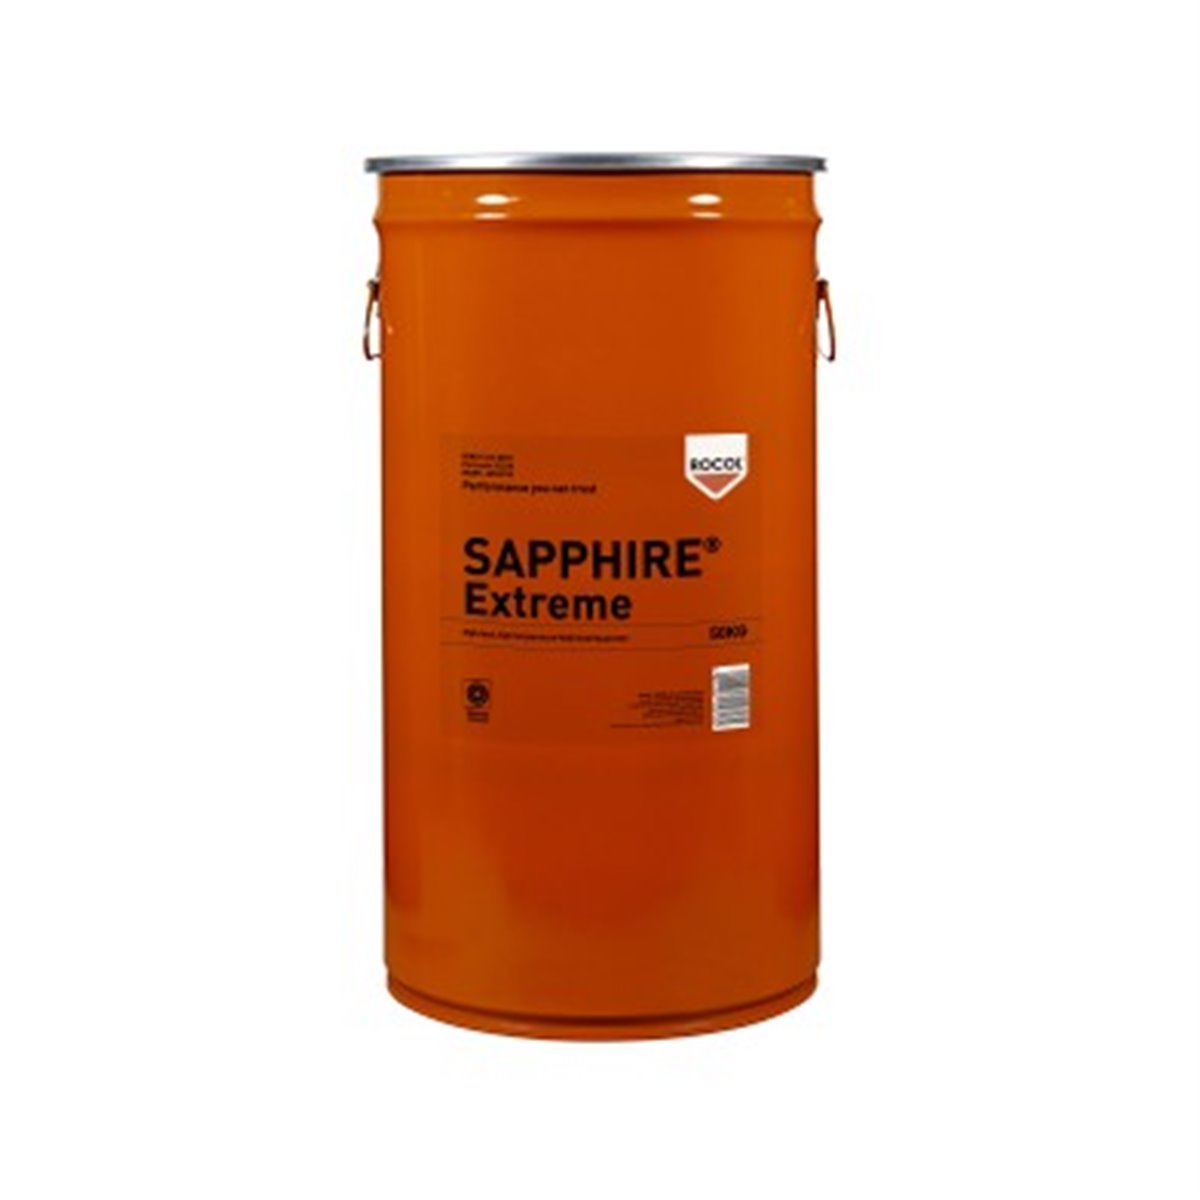 SAPPHIRE Extreme Rocol 50kg RS12218